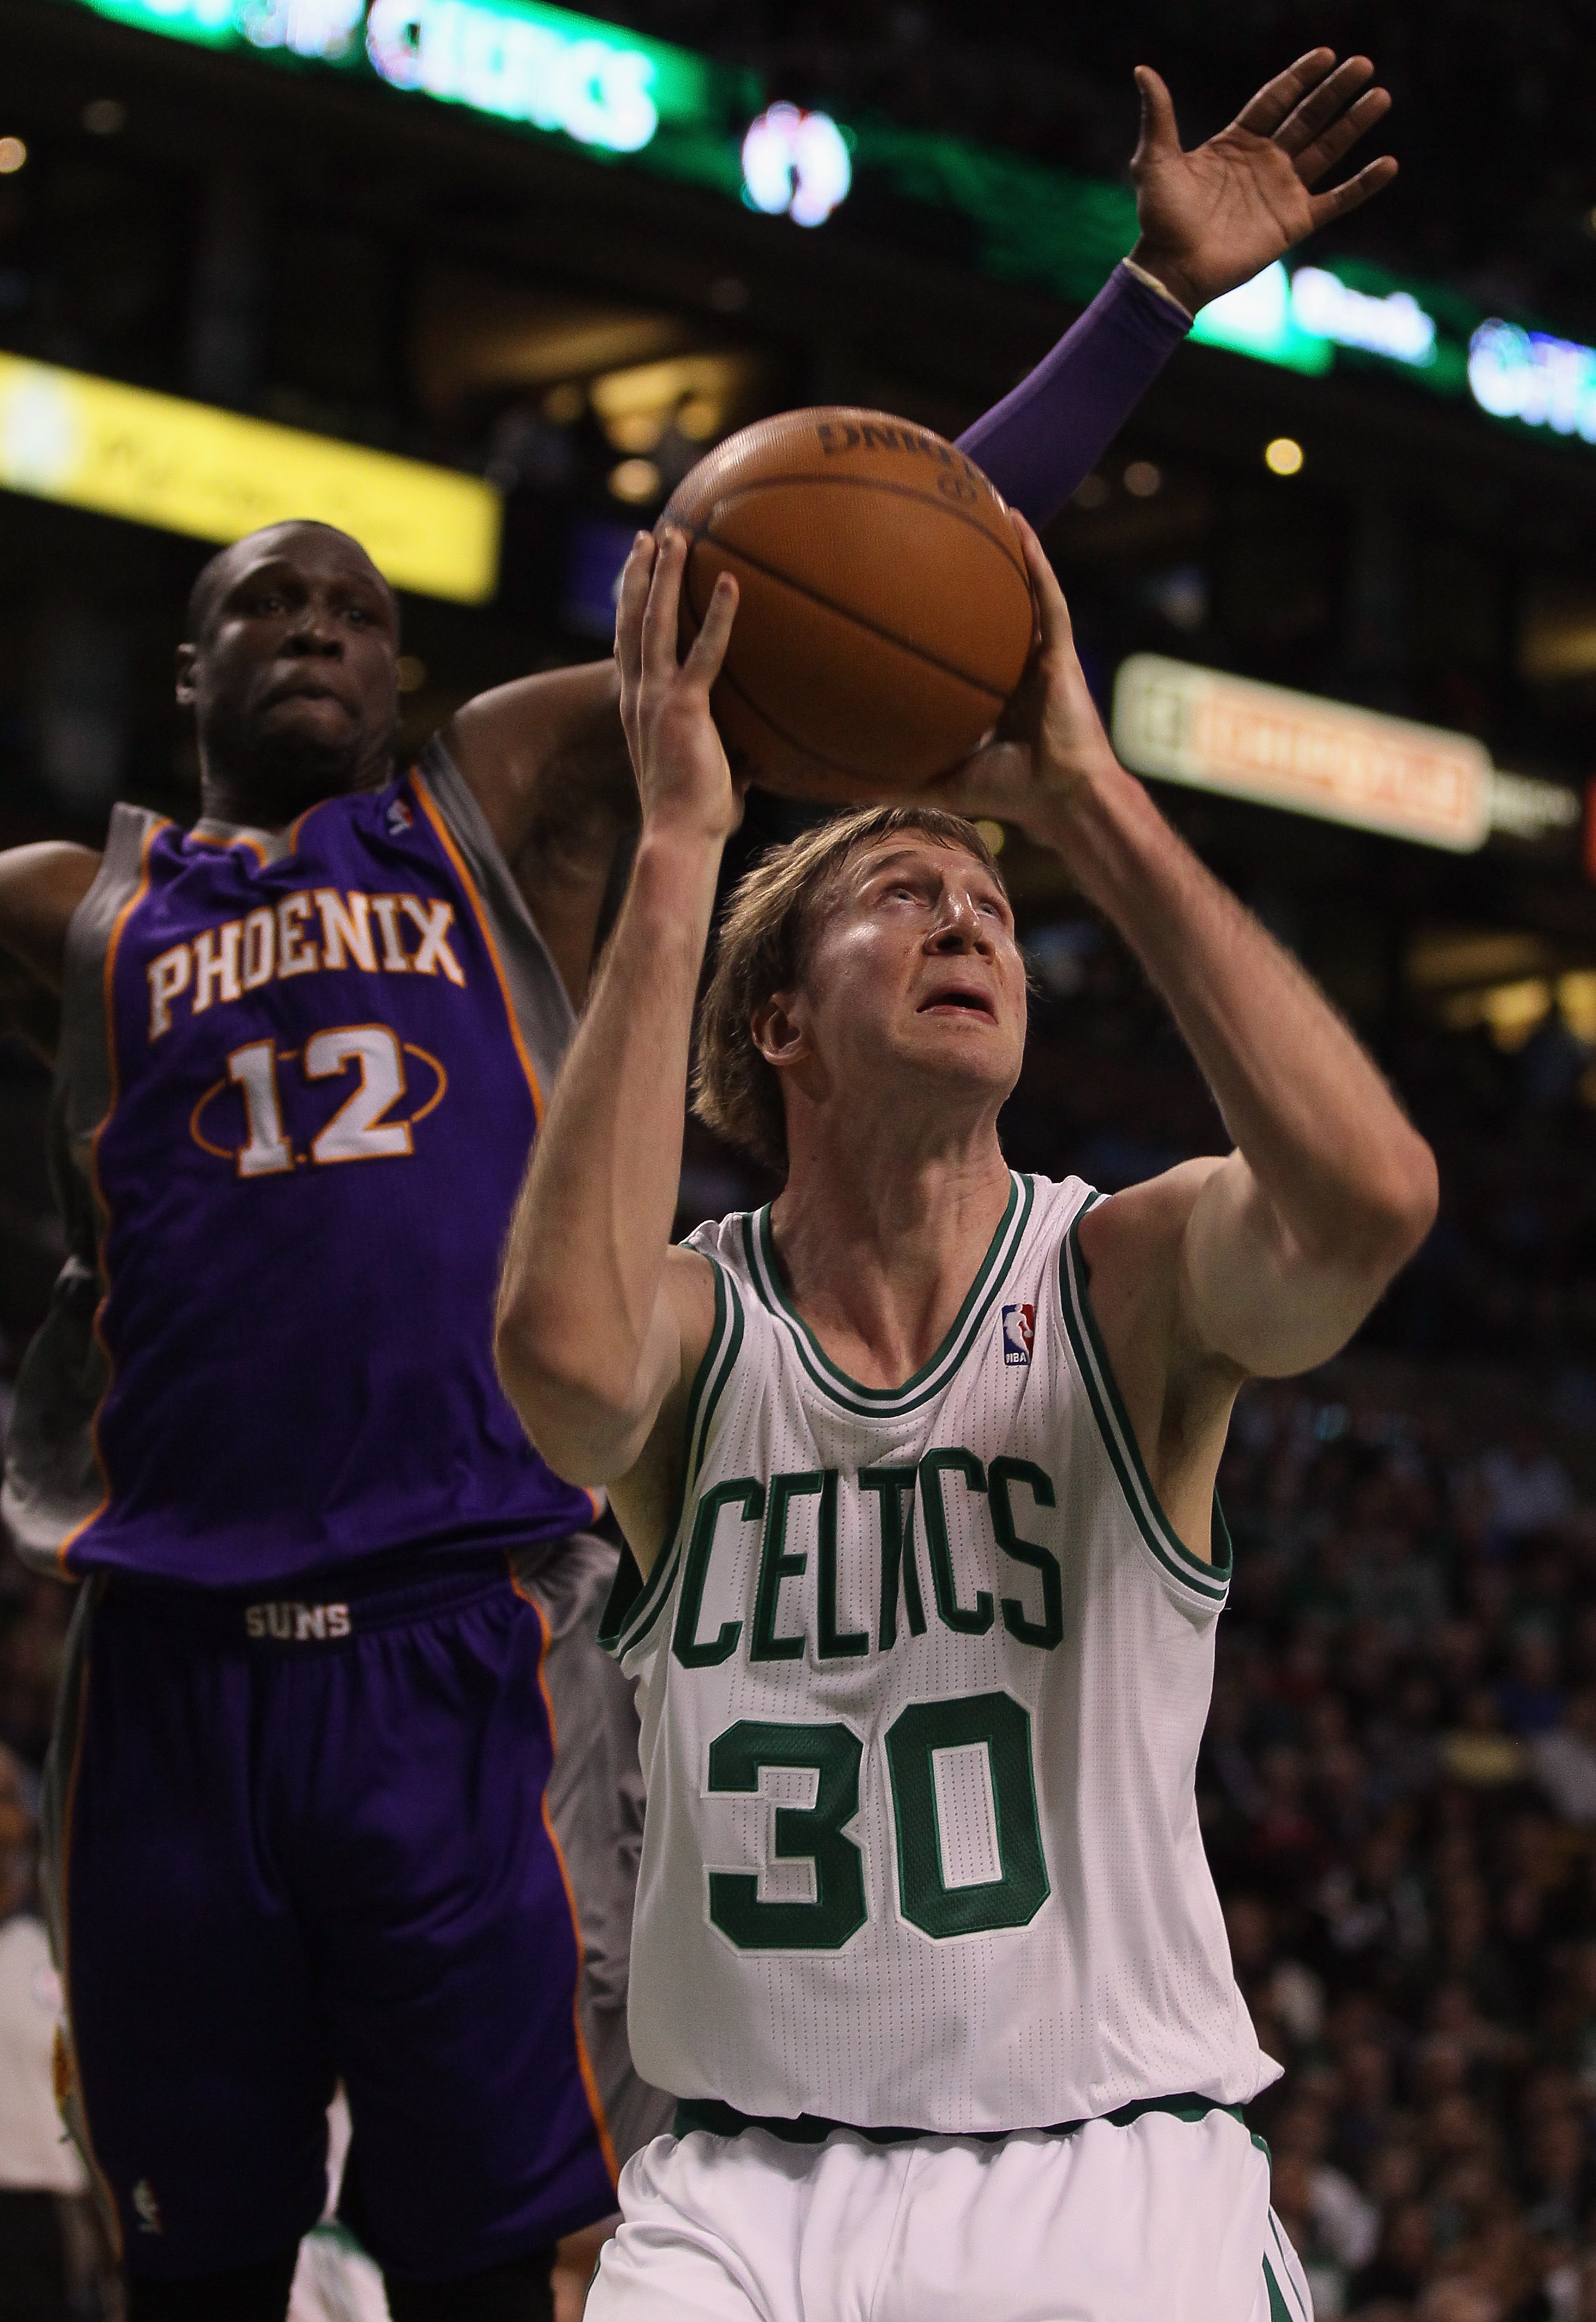 BOSTON, MA - MARCH 02:  Troy Murphy #30 of the Boston Celtics takes a shot as Mickael Pietrus #12 of the Phoenix Suns defends on March 2, 2011 at the TD Garden in Boston, Massachusetts.  NOTE TO USER: User expressly acknowledges and agrees that, by downlo